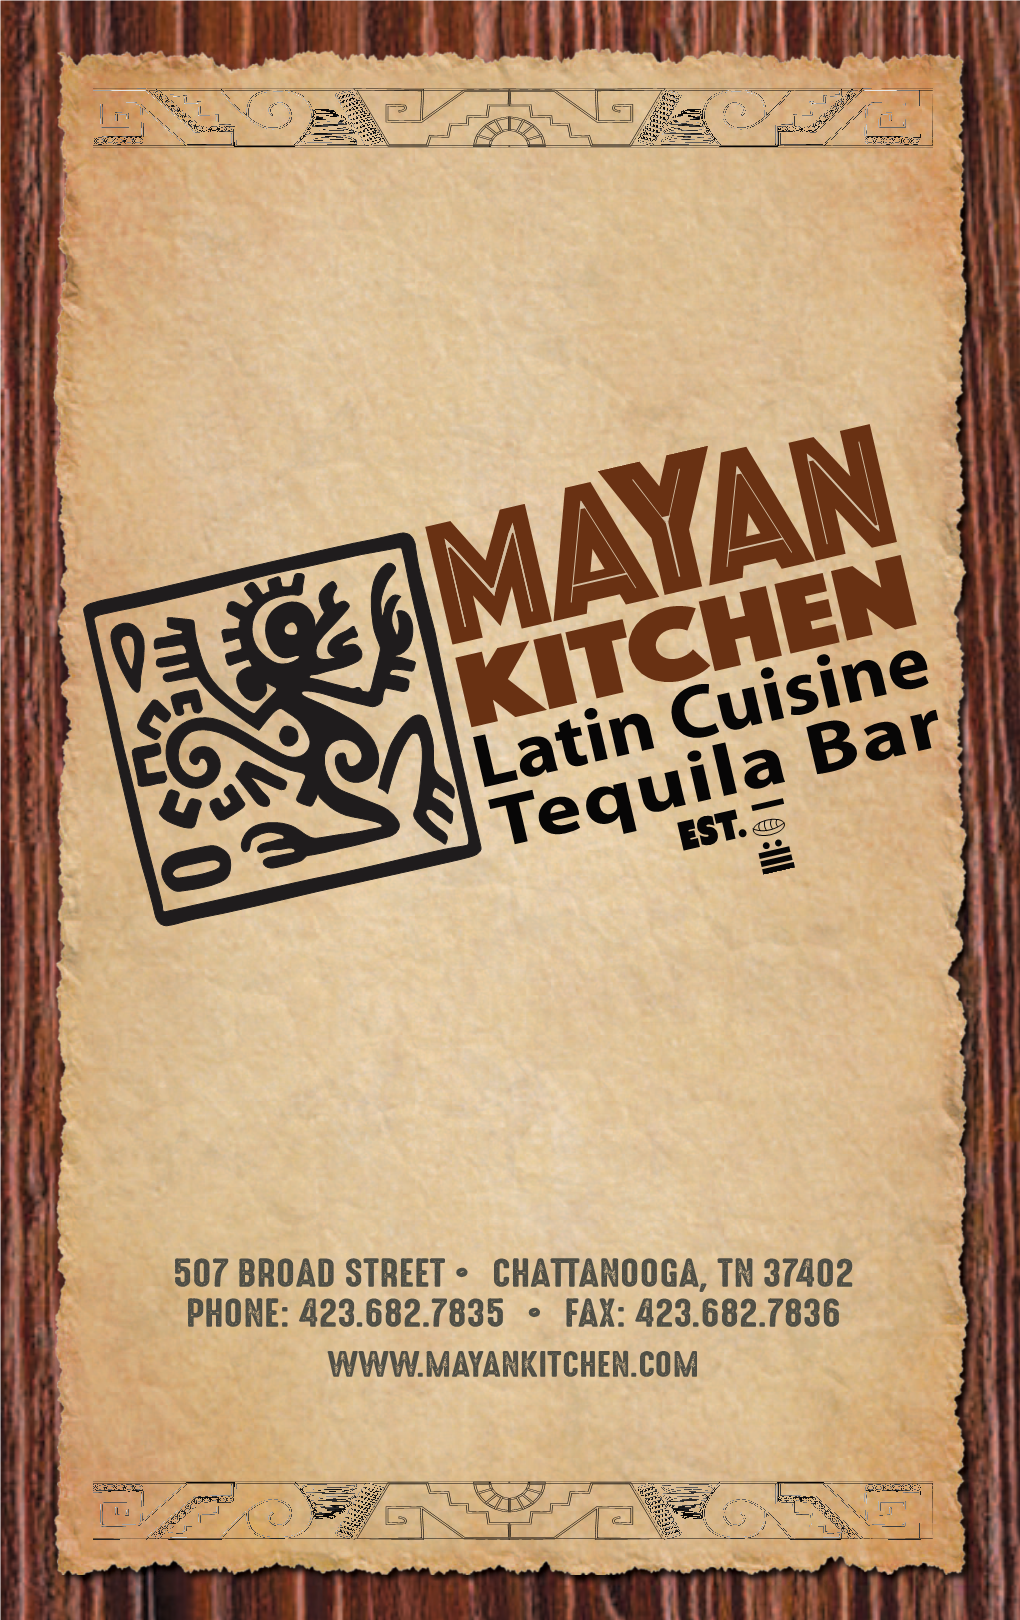 Mayan Kitchen Is Not Responsible for Lost Or Stolen Personal Property